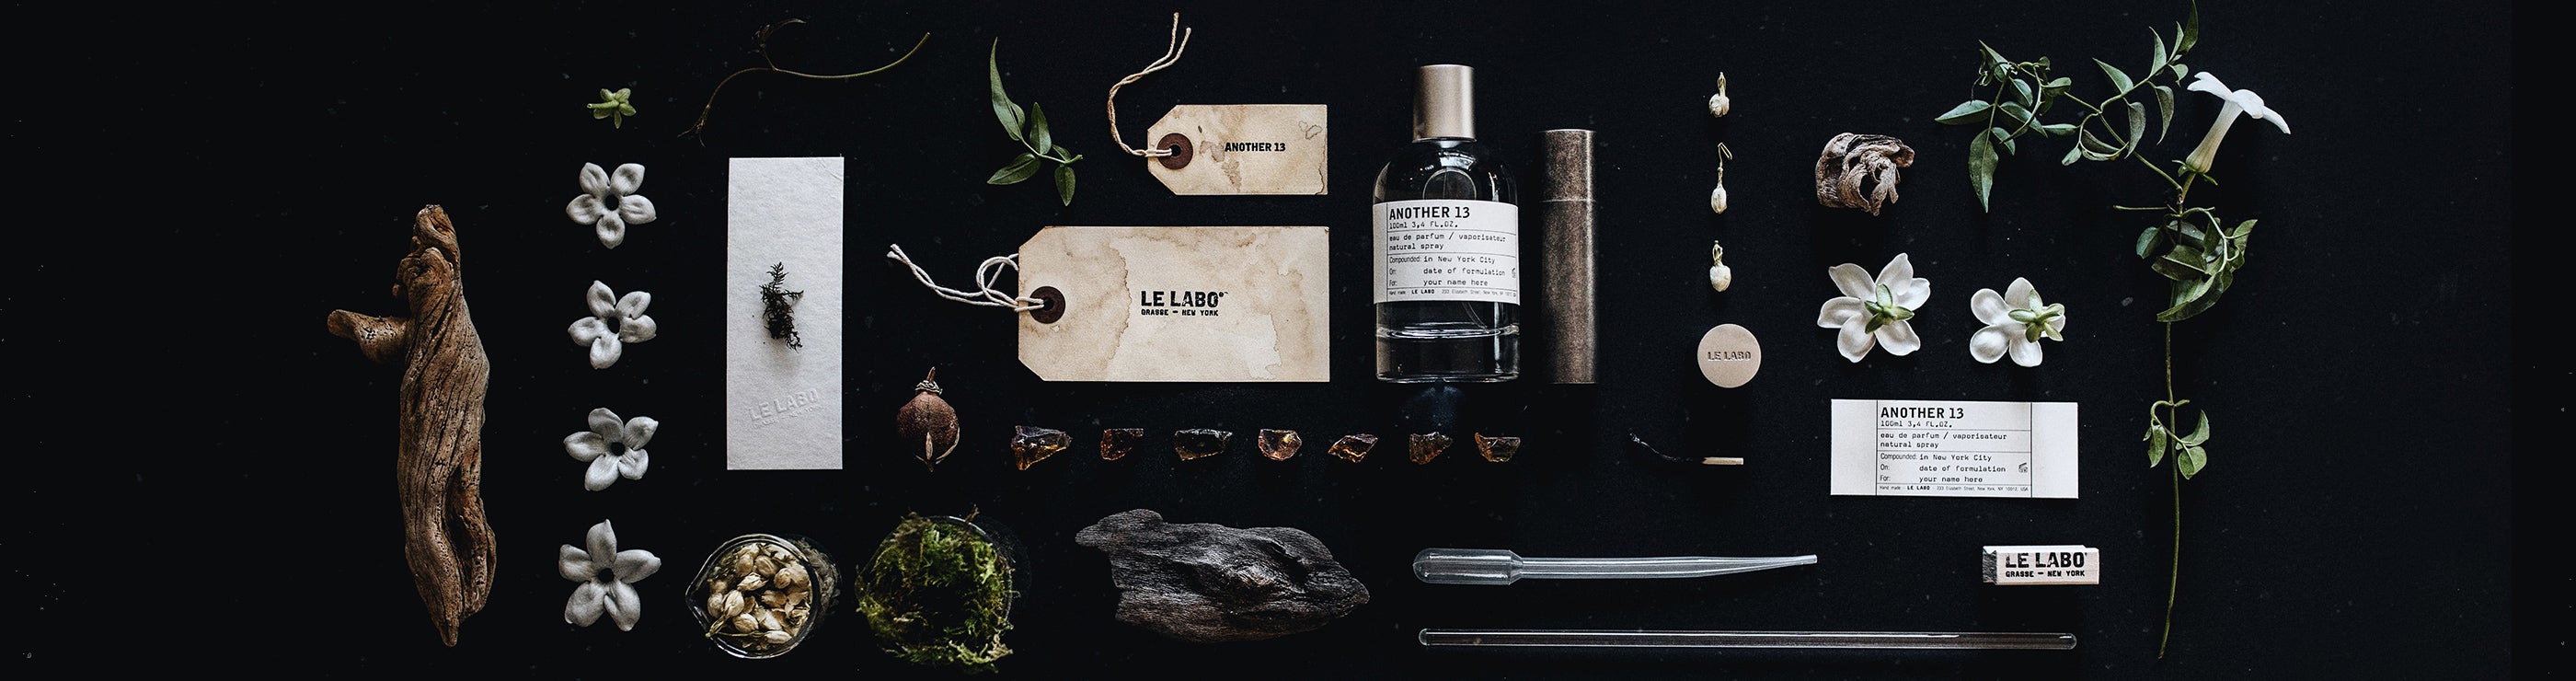 LE LABO ル ラボ べ アナザー ANOTHER 13 100ml